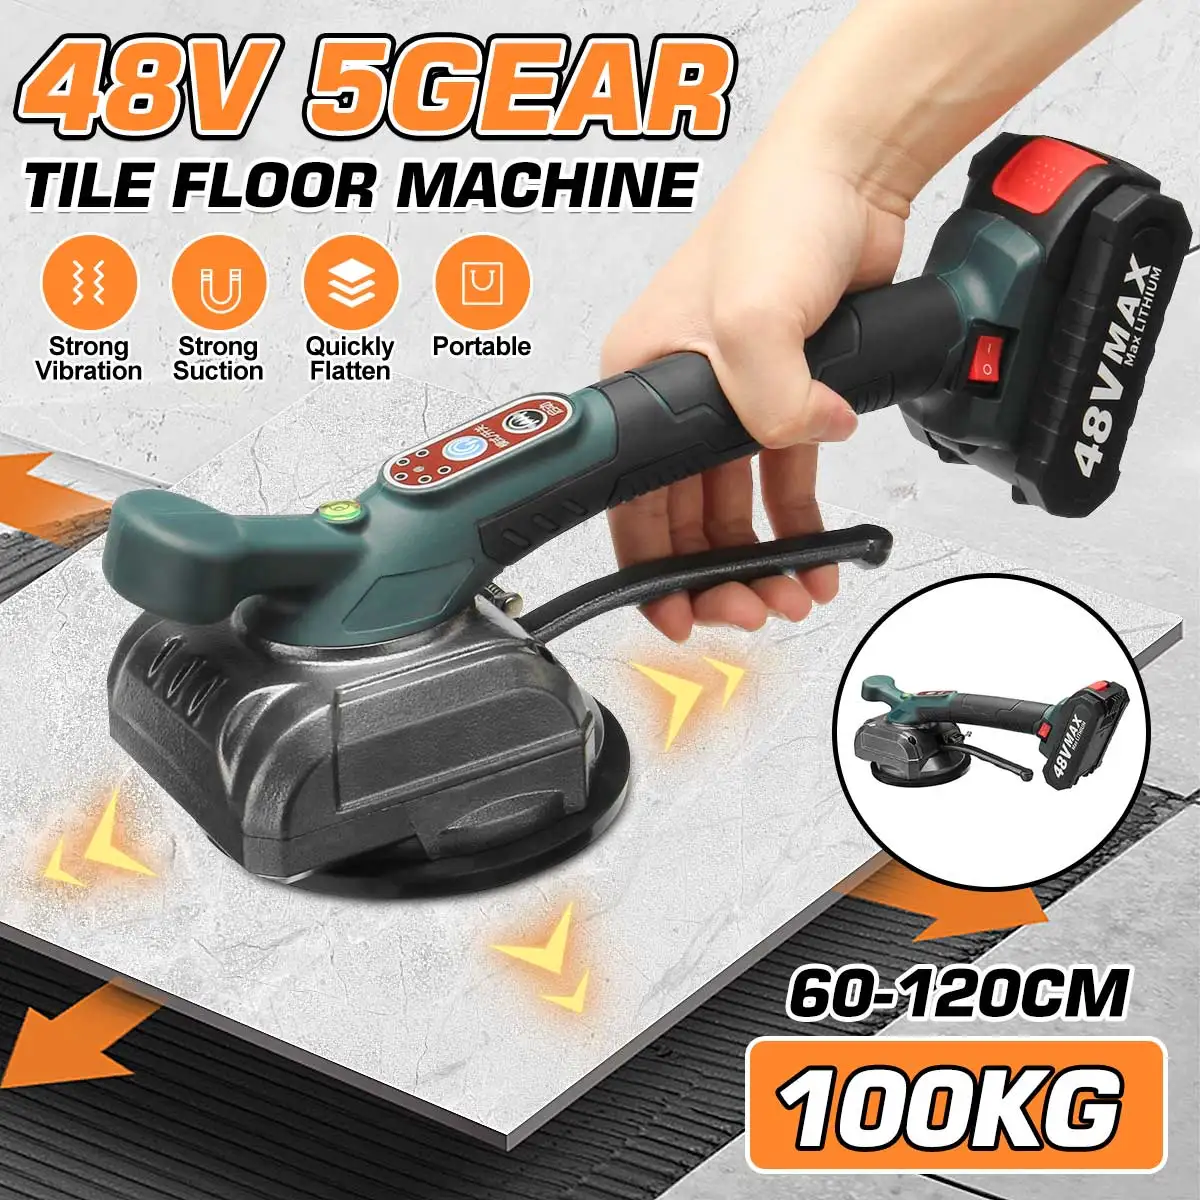 48V Tile Vibrator Suction Cup Tiling Tile Machine Floor Laying Machine Adjustable Automatic Floor Vibrator With 2 Li-ion Battery